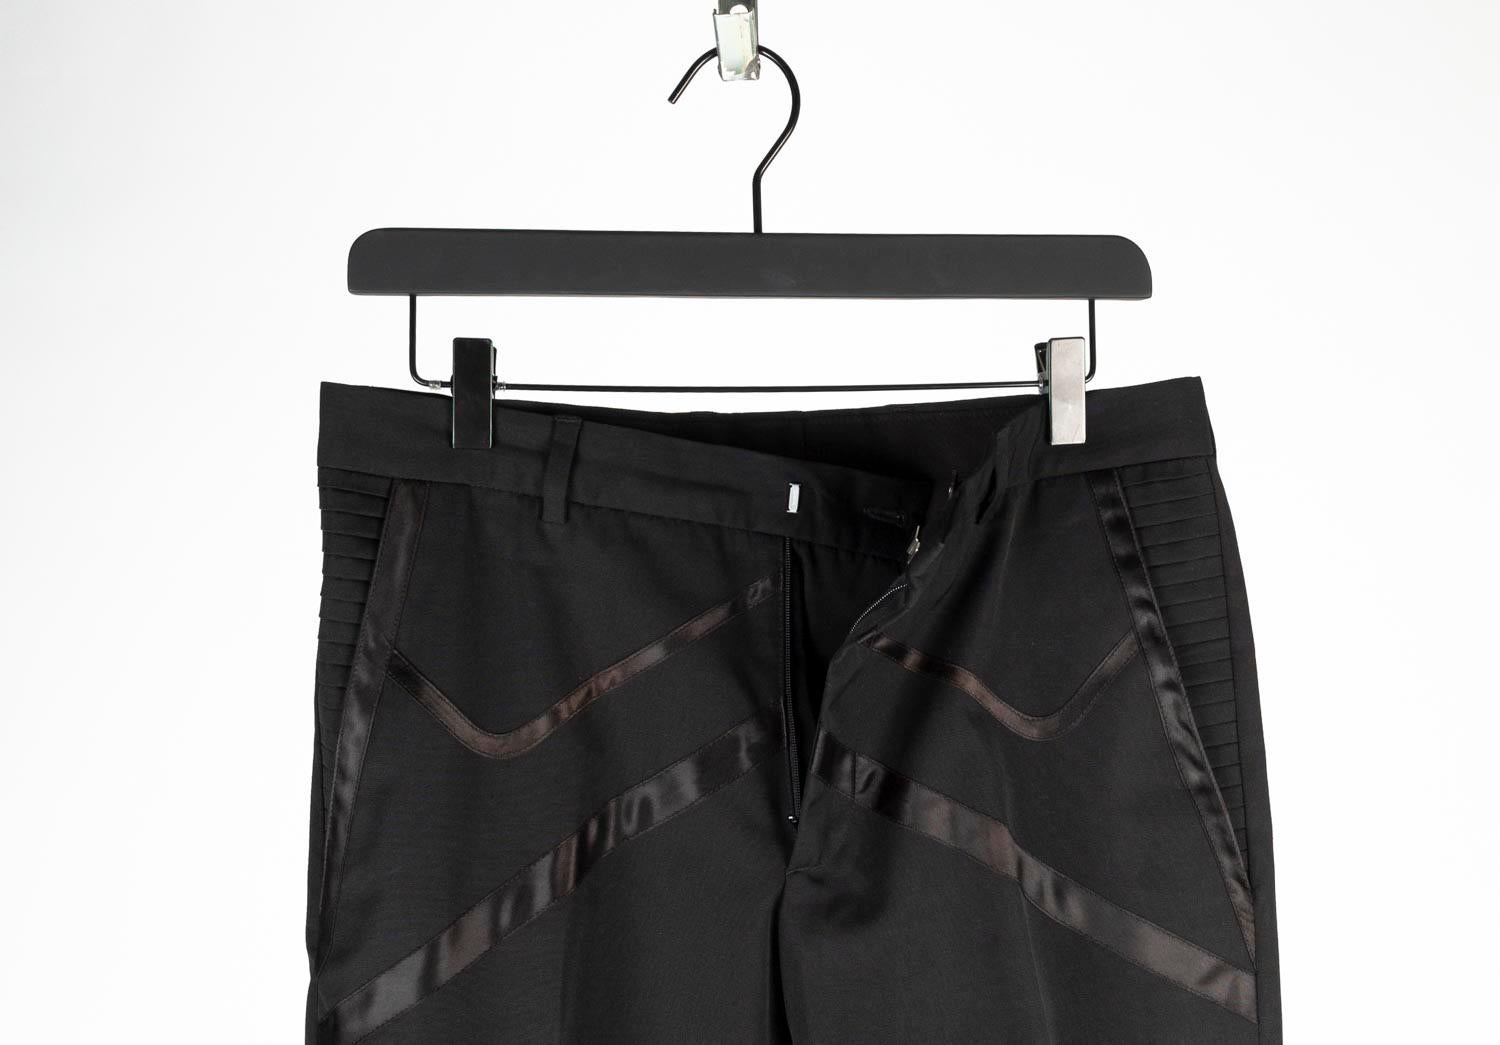 100% genuine Dior Homme from SS04 Strip Men Pants.
Color: black
(An actual color may a bit vary due to individual computer screen interpretation)
Material: 67% polyester, 33% cotton
Tag size: ITA 46 (S/M)
These pants are great quality item. Rate 9